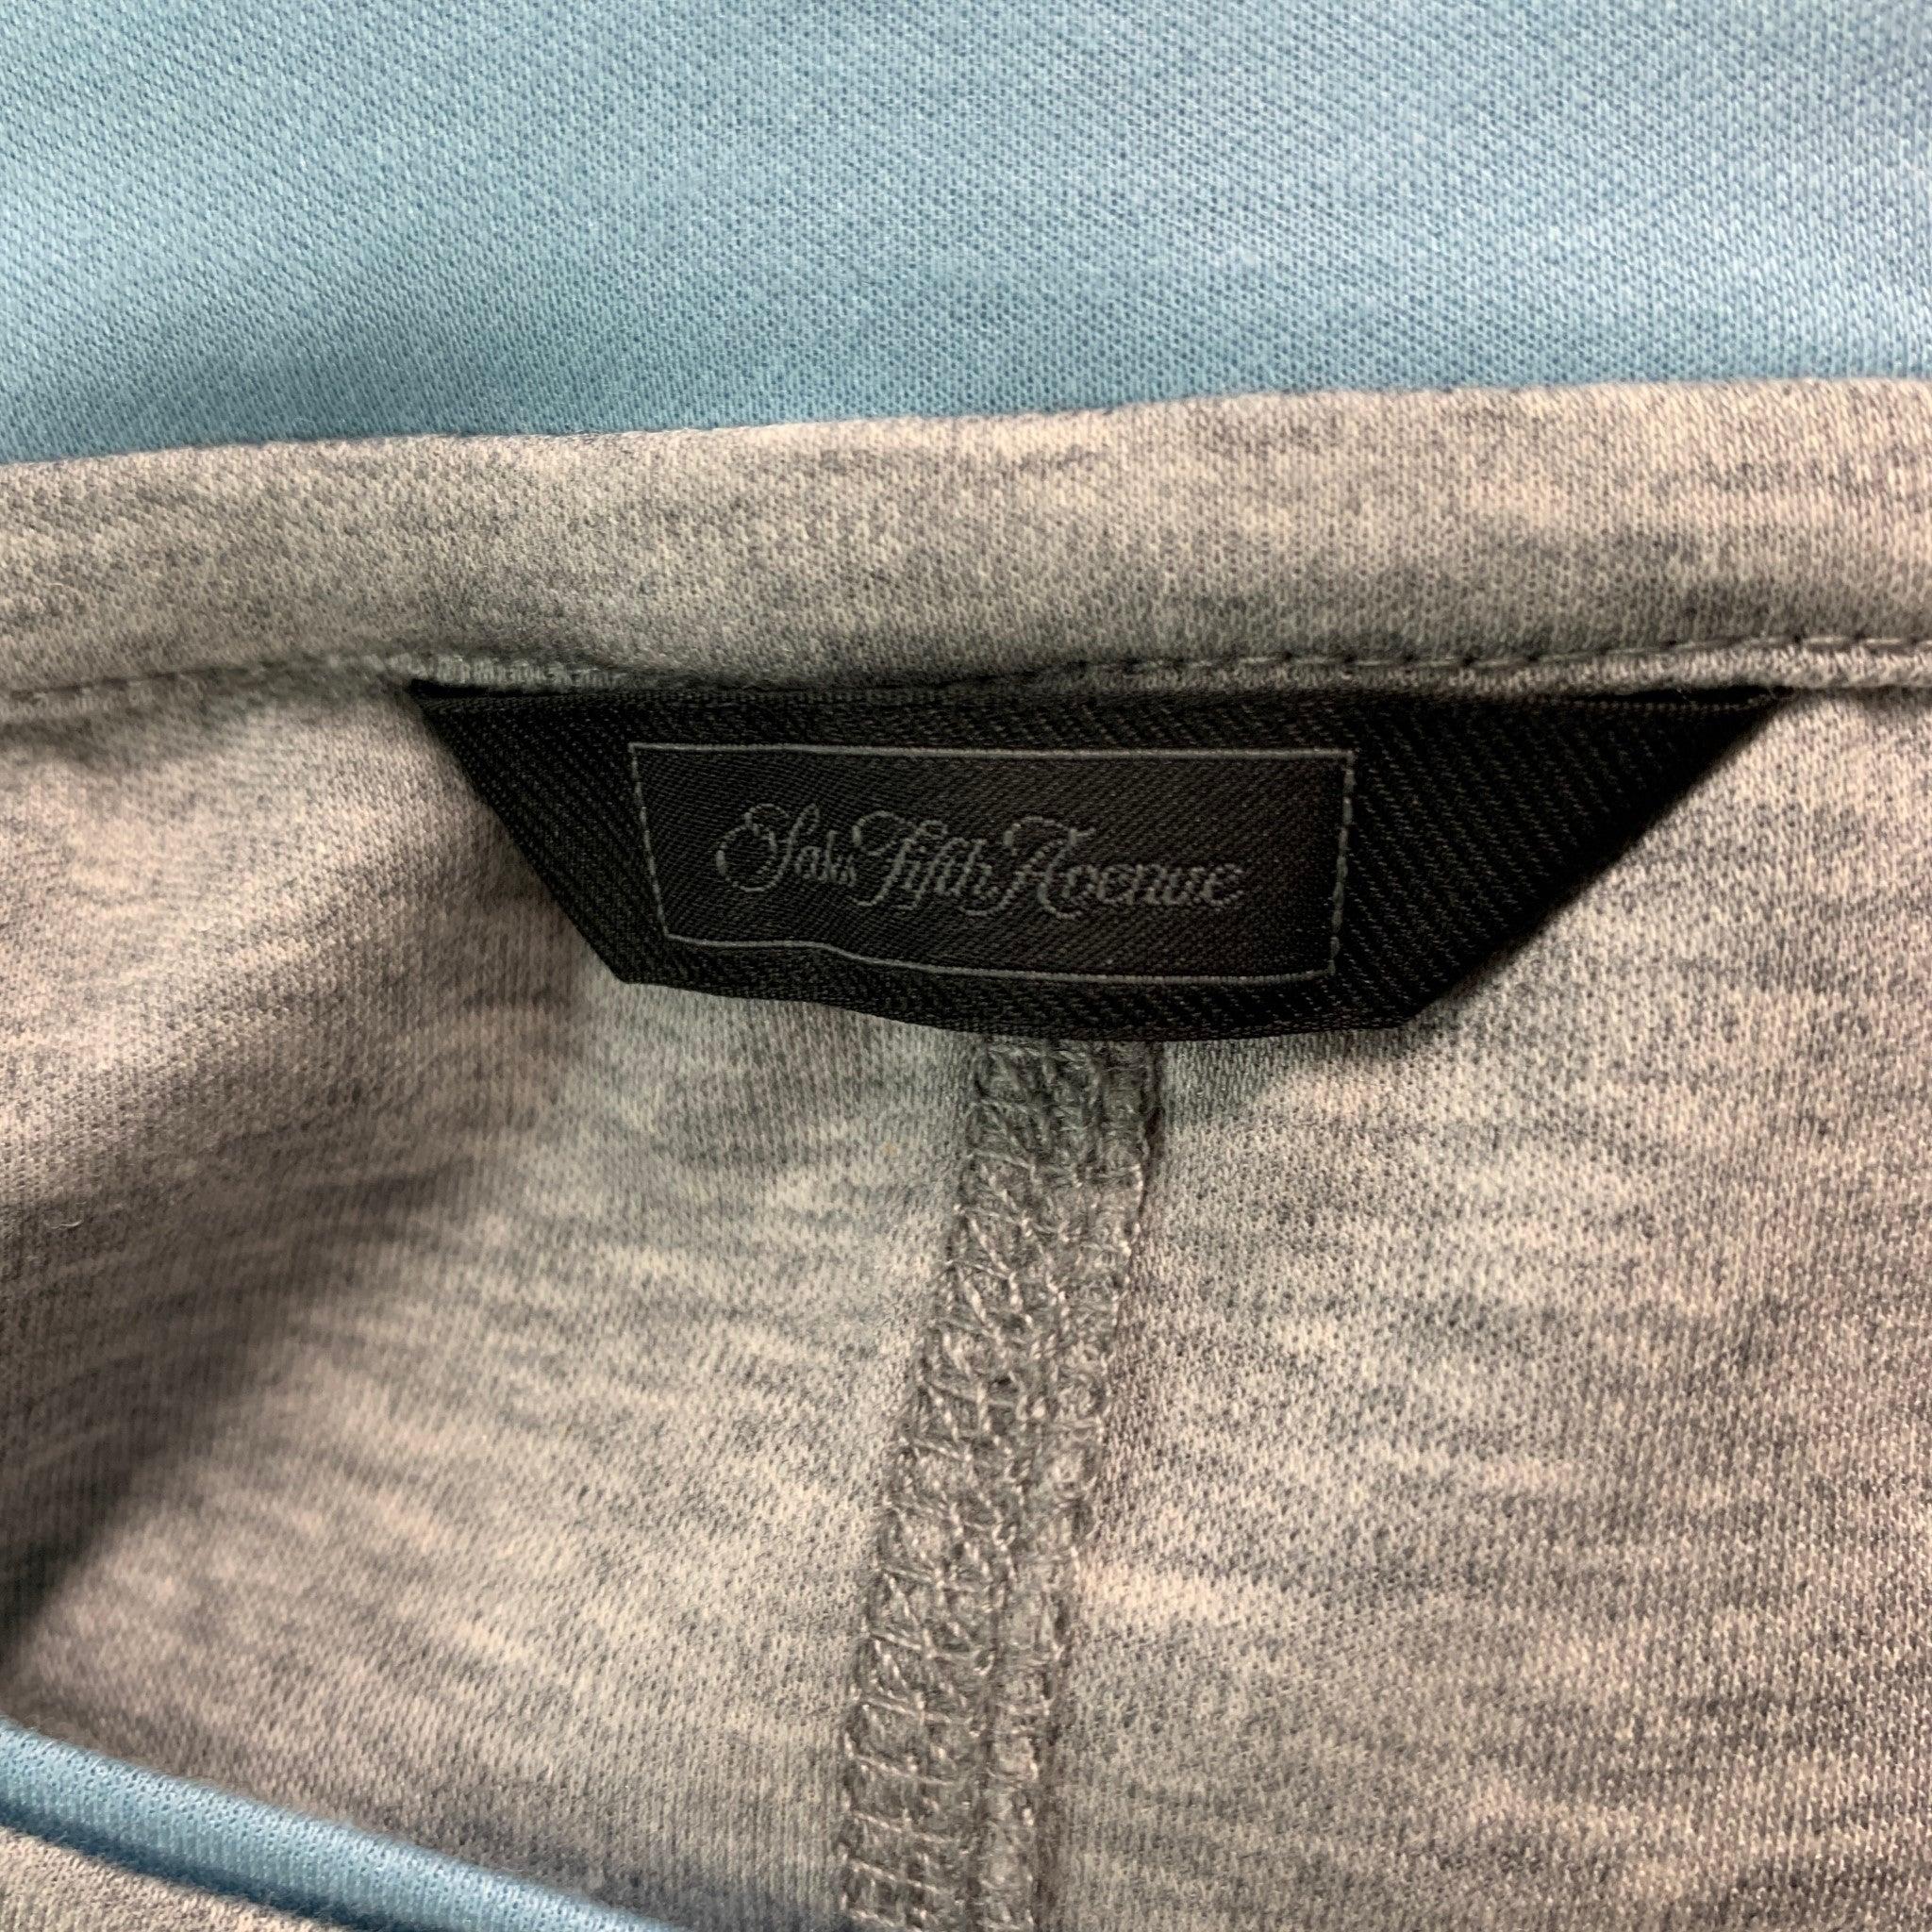 Men's SAKS FIFTH AVENUE Size M Grey Blue Heather Lyocell Cotton Long Sleeve T-shirt For Sale